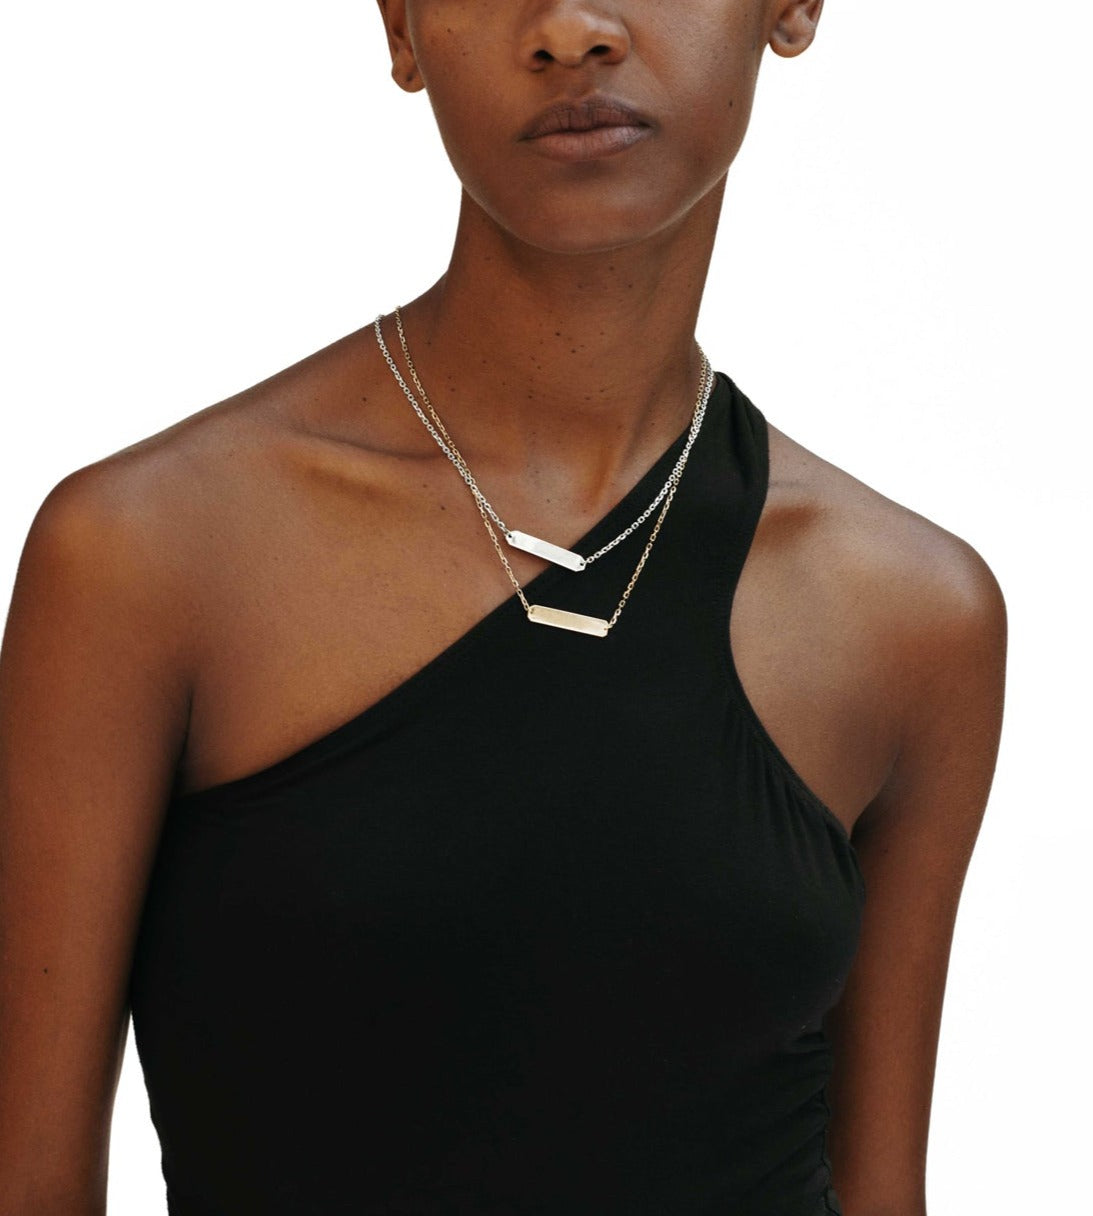 The Bernard James Signa necklace features a radiant hand-cut ID plaque on a sterling silver diamond cut cable chain,  connected with 14k gold jump rings. The plate is kept clean on the front for a sleek feel but can be engraved upon request.